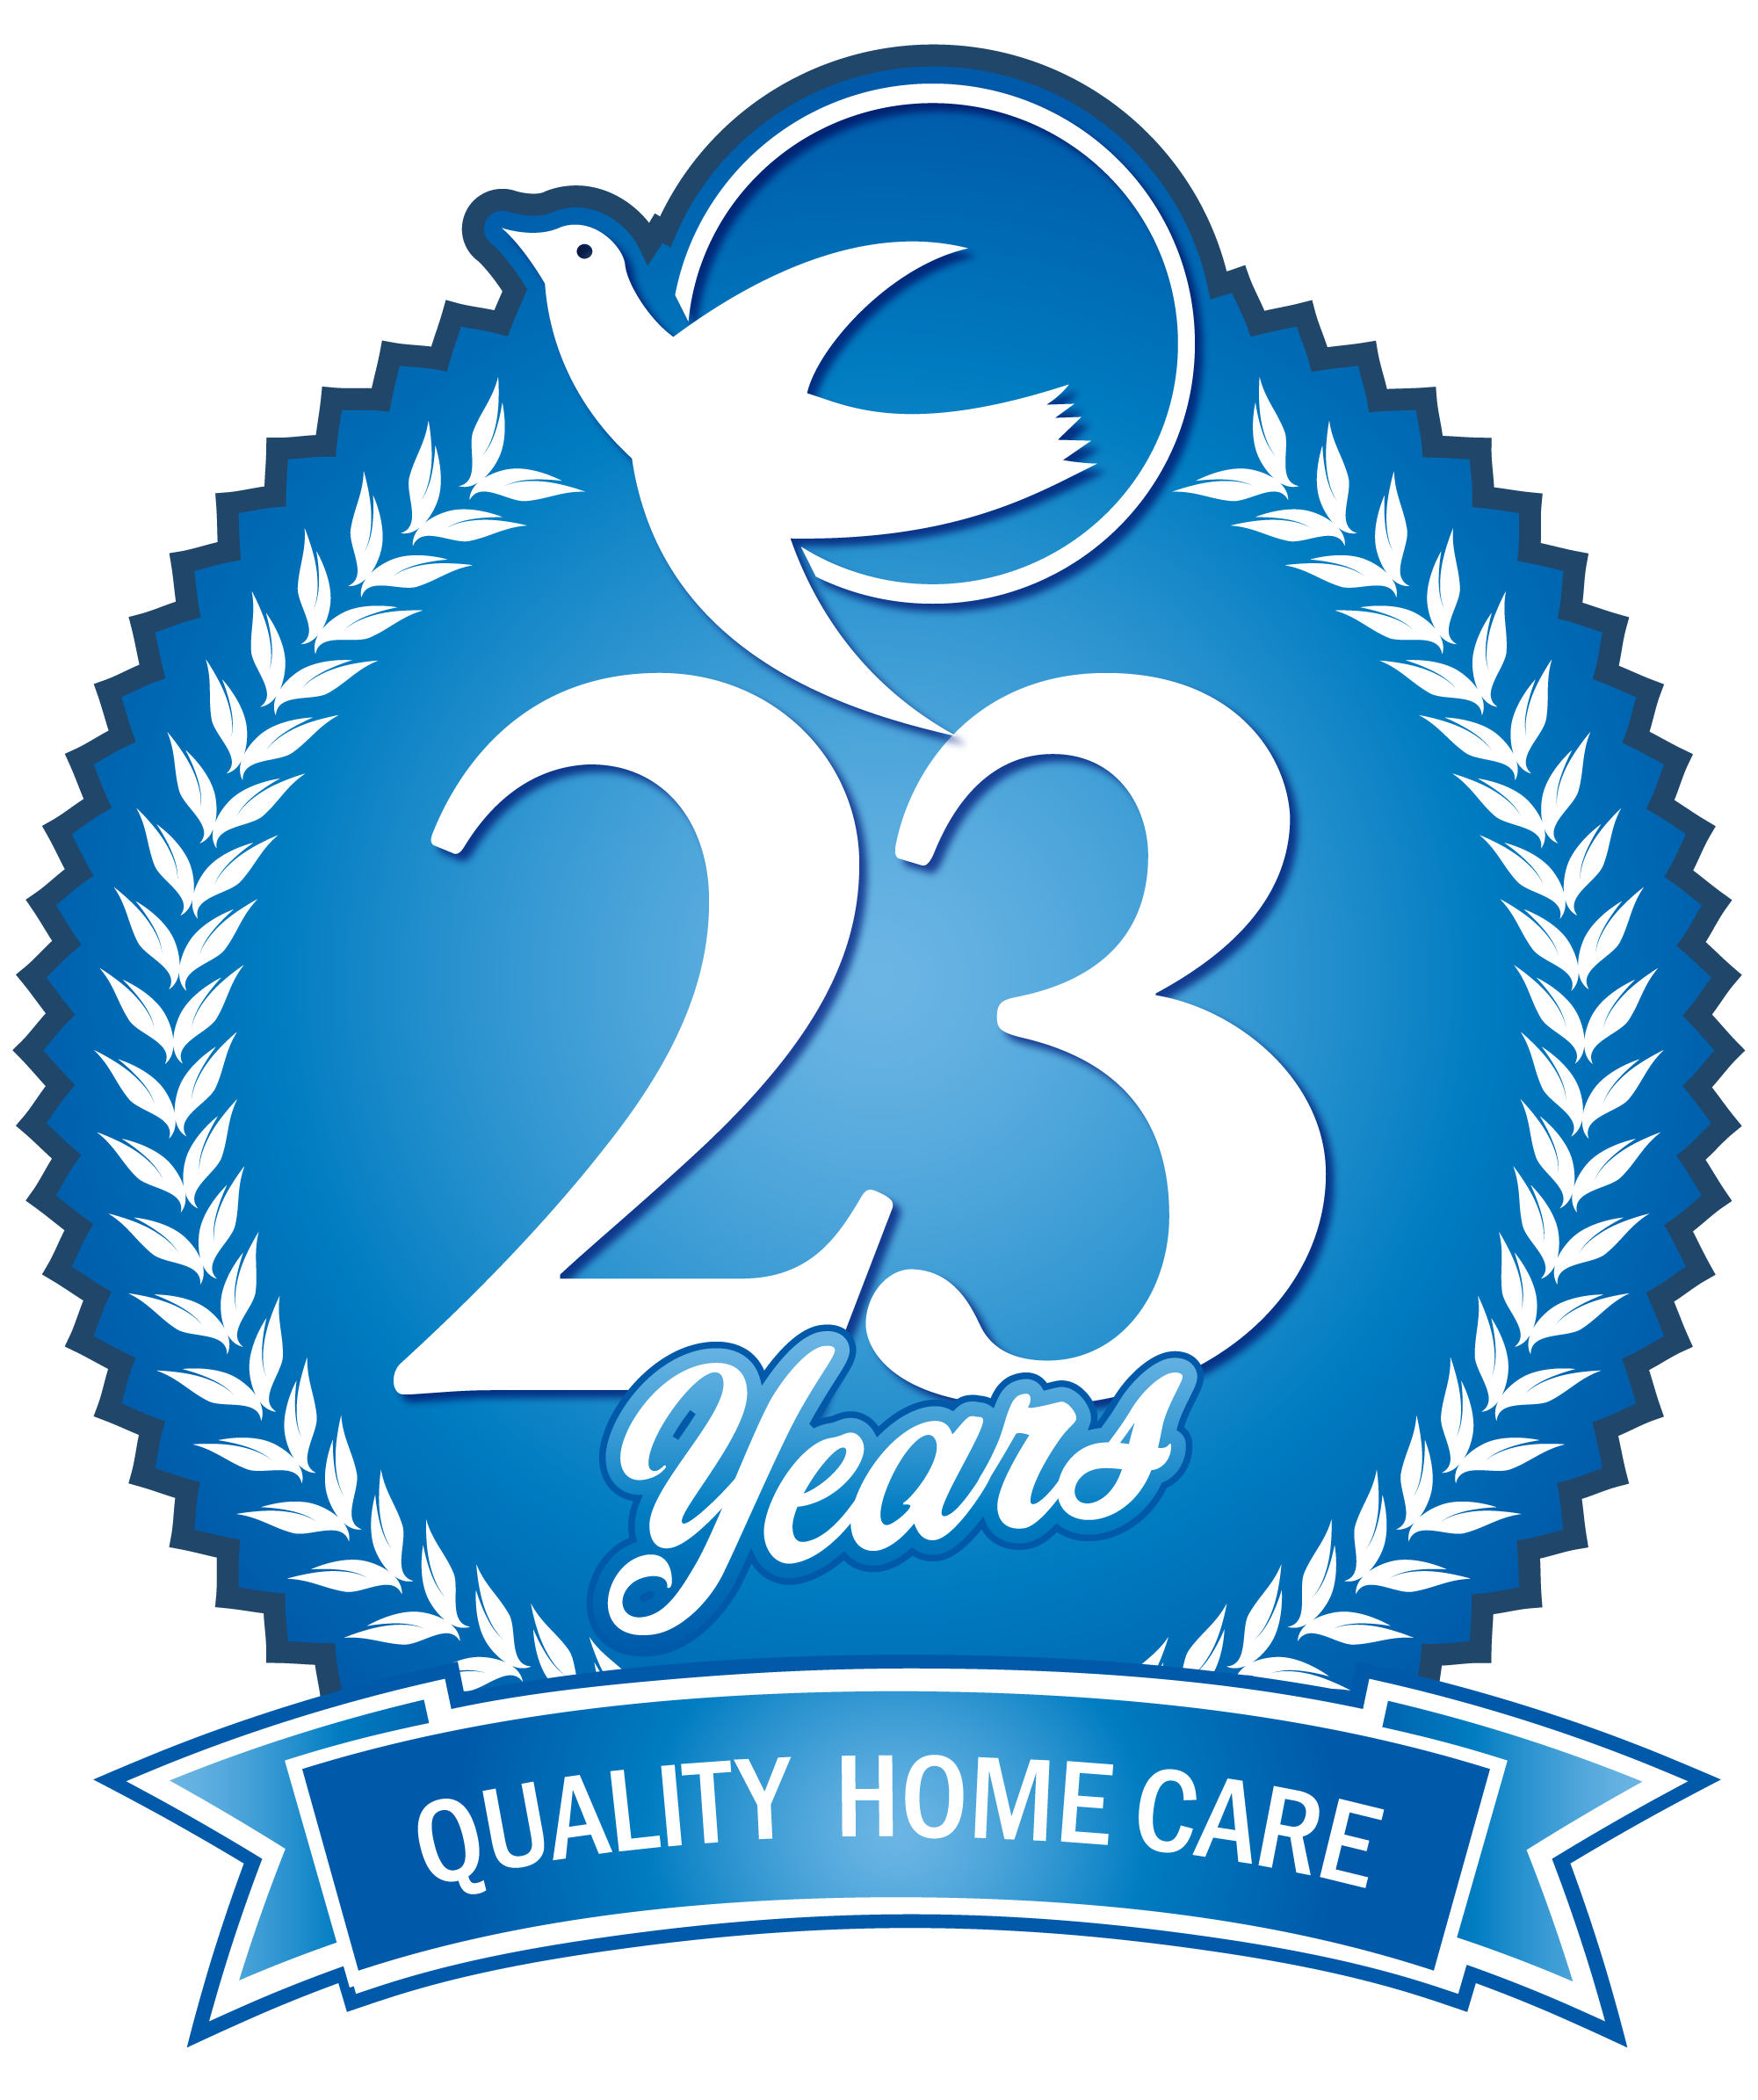 23 Years of Quality Home Care